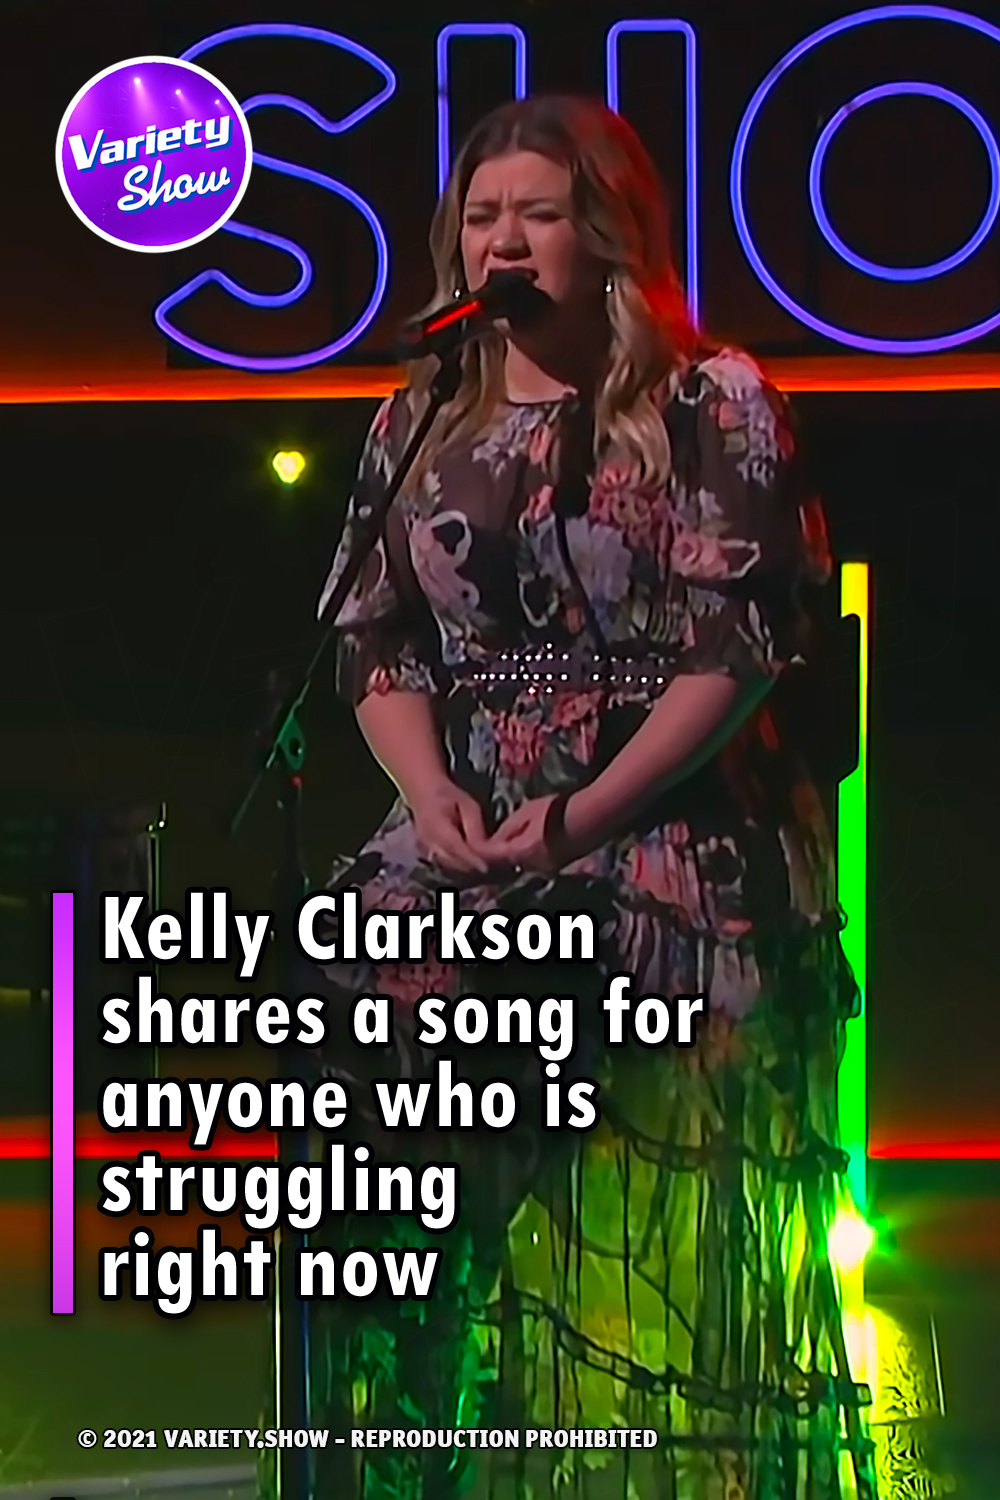 Kelly Clarkson shares a song for anyone who is struggling right now